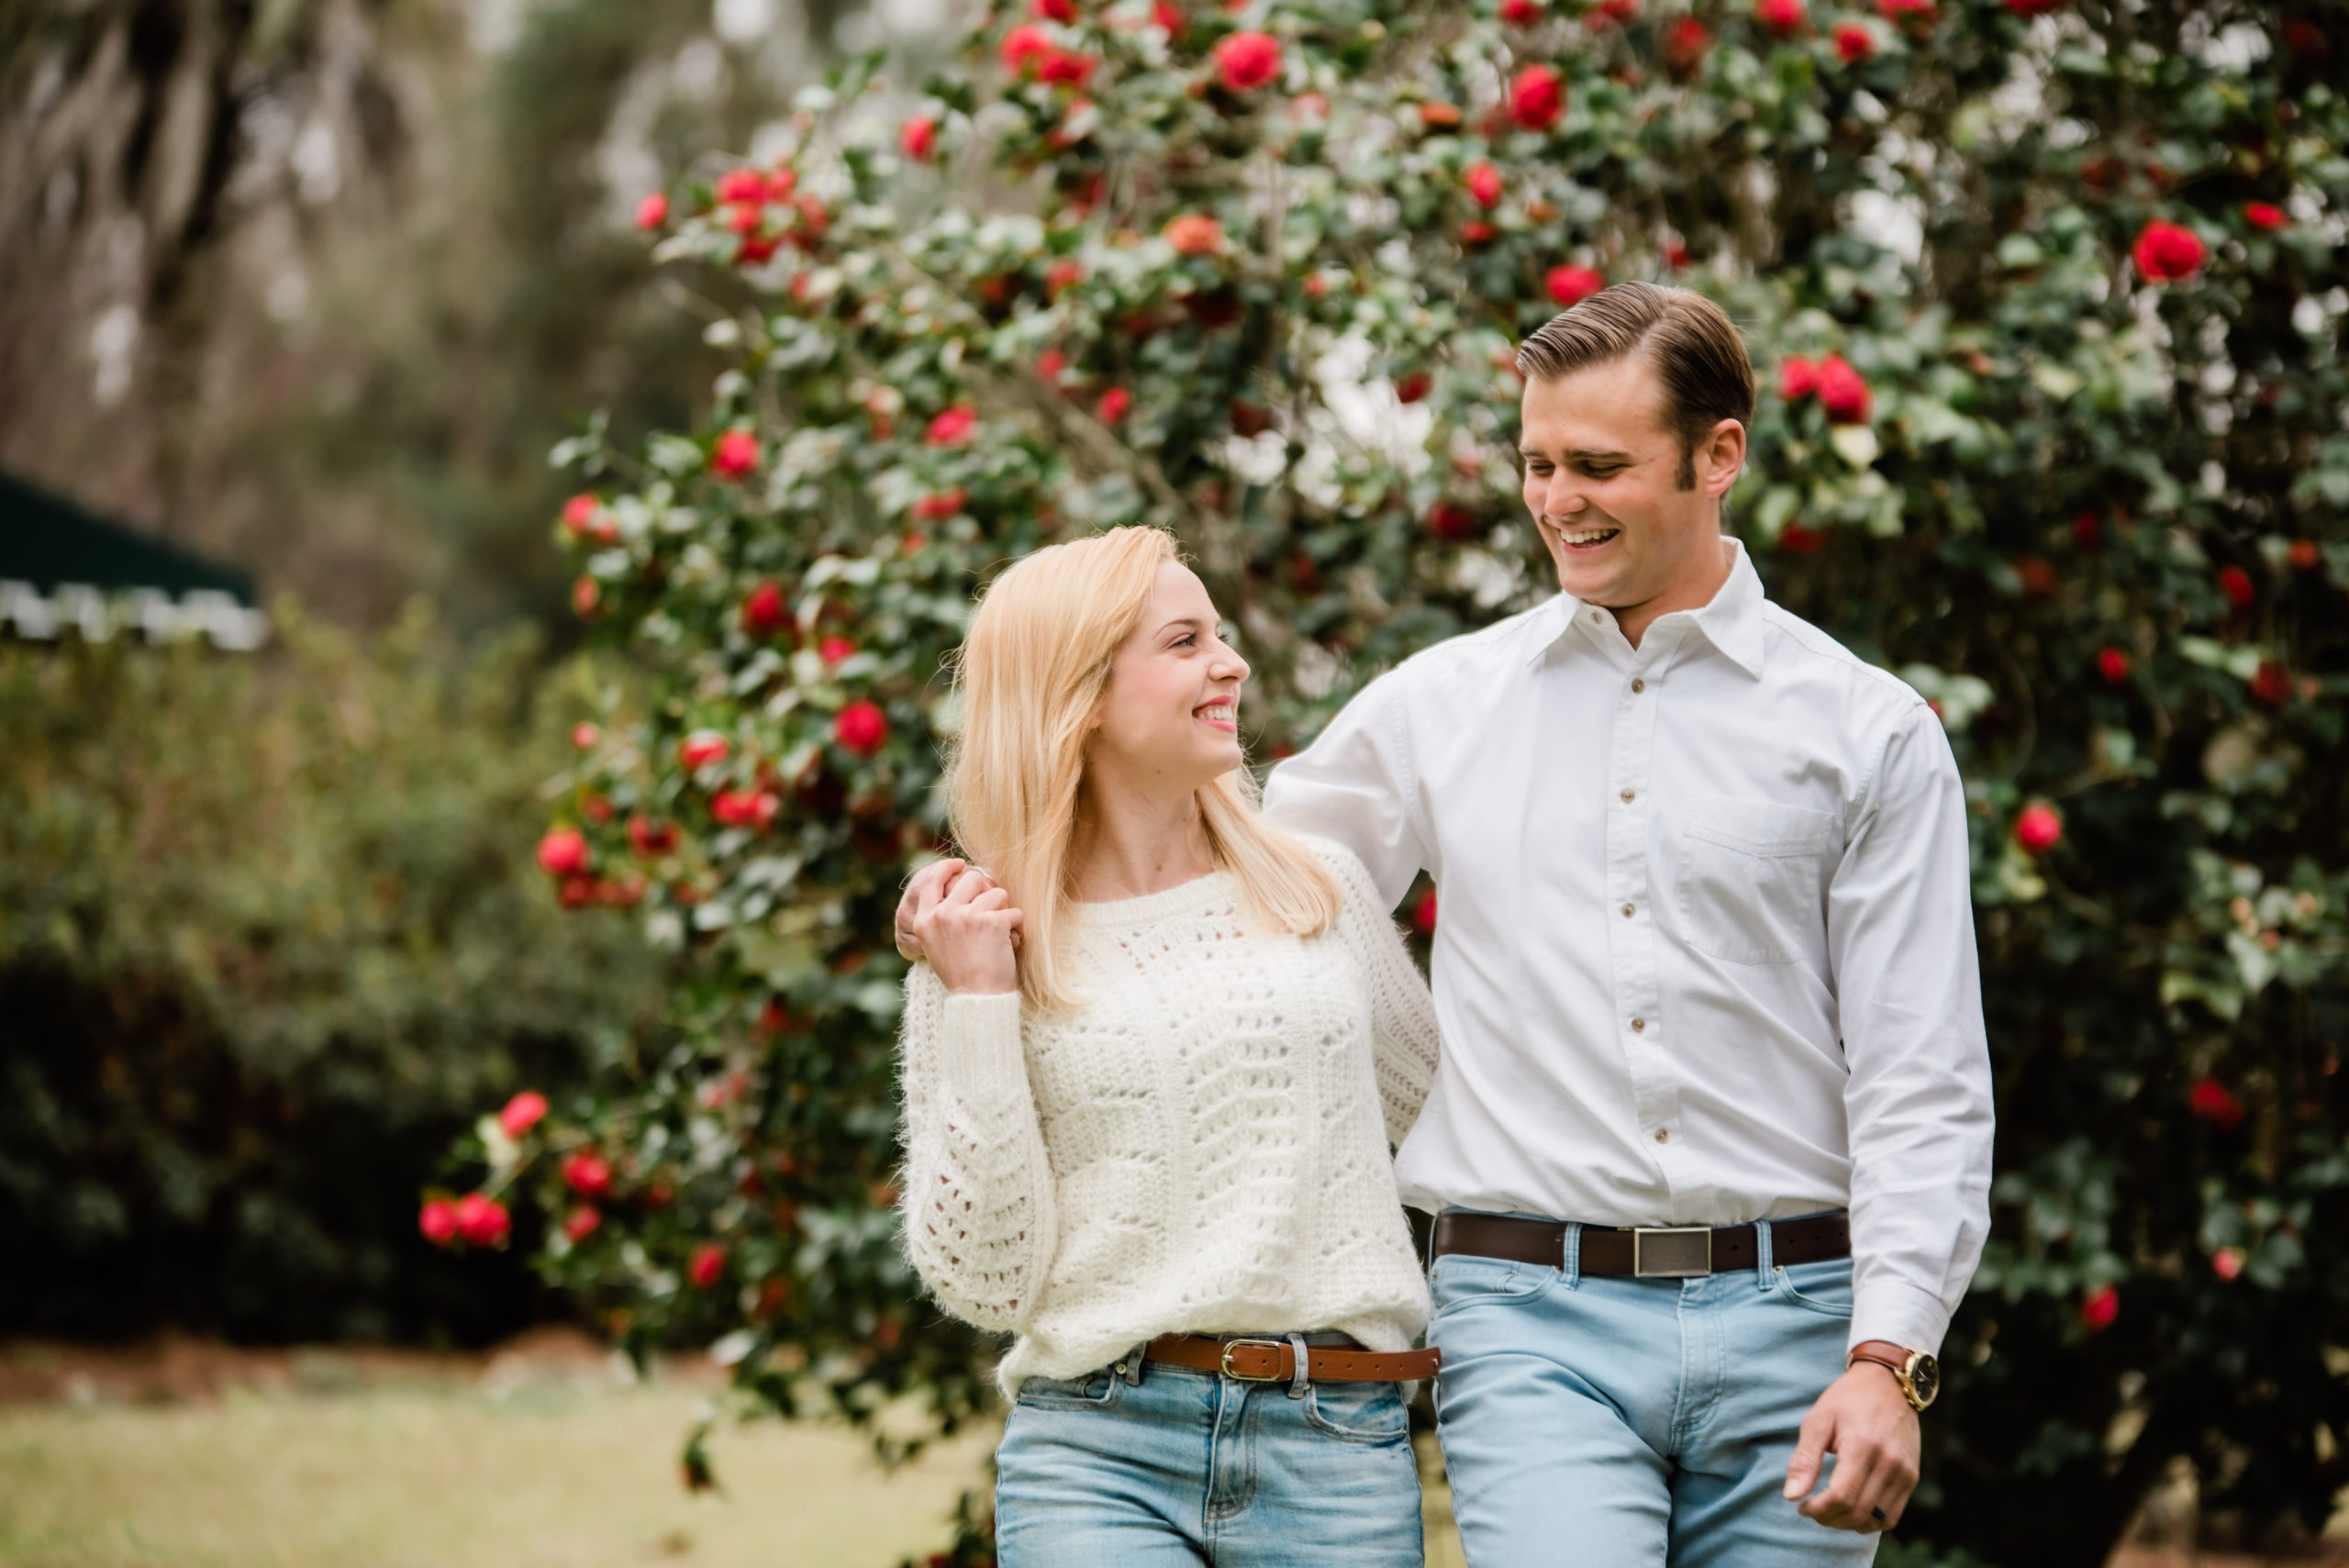 engagement session at heritage park and gardens in live oak Florida by Black tie and co